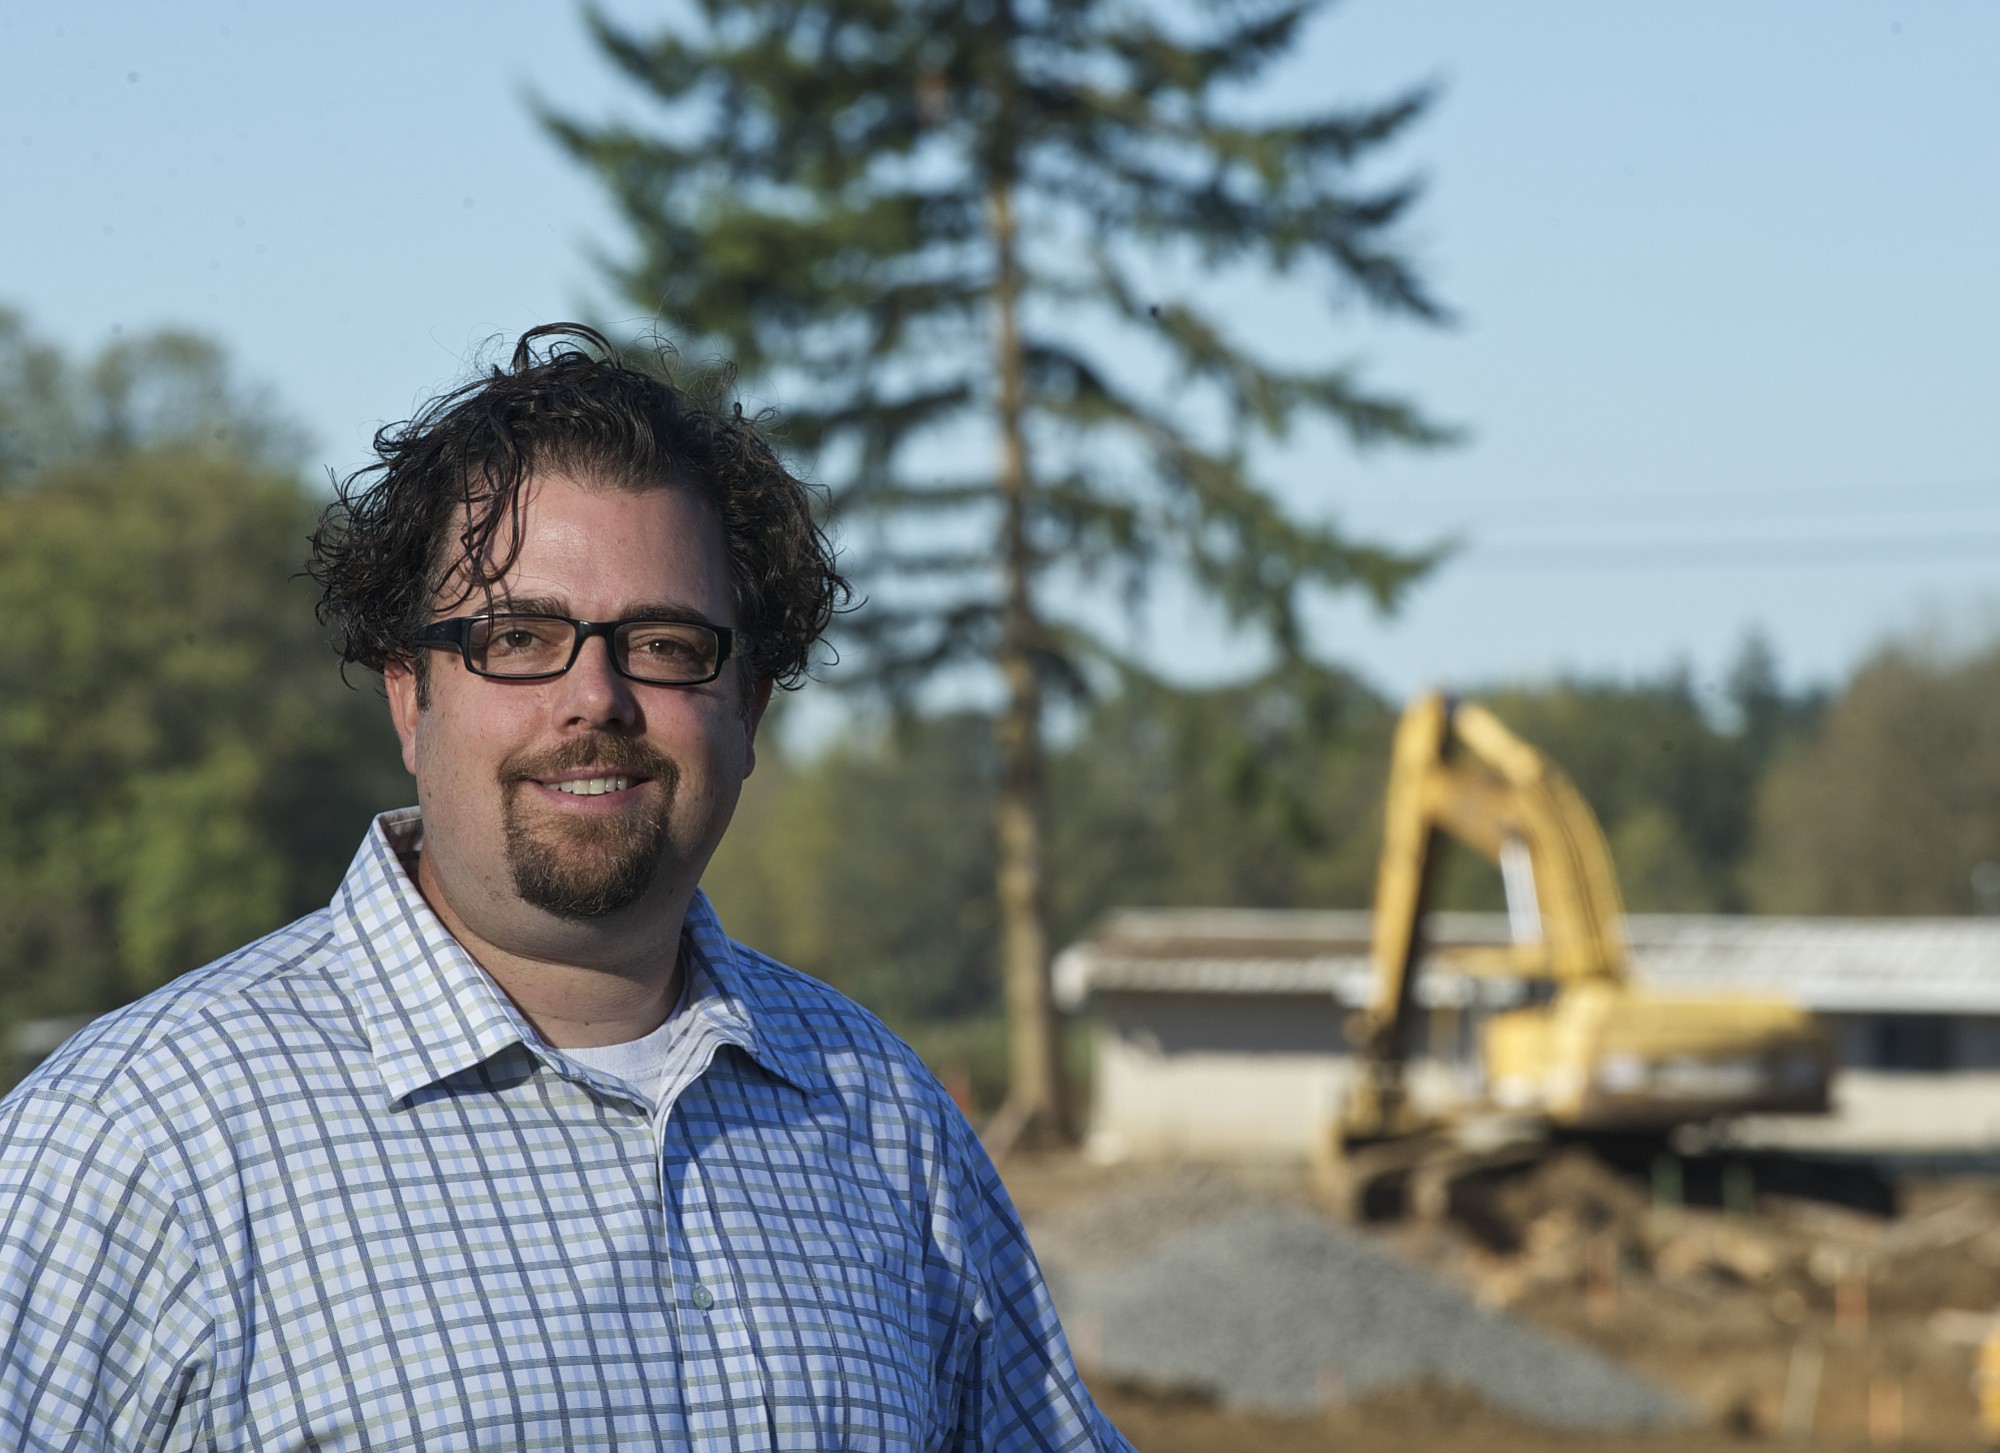 Zachary Kaufman/The Columbian
Troy Johns, owner of Urban NW Homes, at the site of his planned Urban Oaks development near Northeast 152nd Avenue and 96th Street in Vancouver. Johns purchased foreclosed subdivisions during the recession and has now is building homes throughout Clark County.